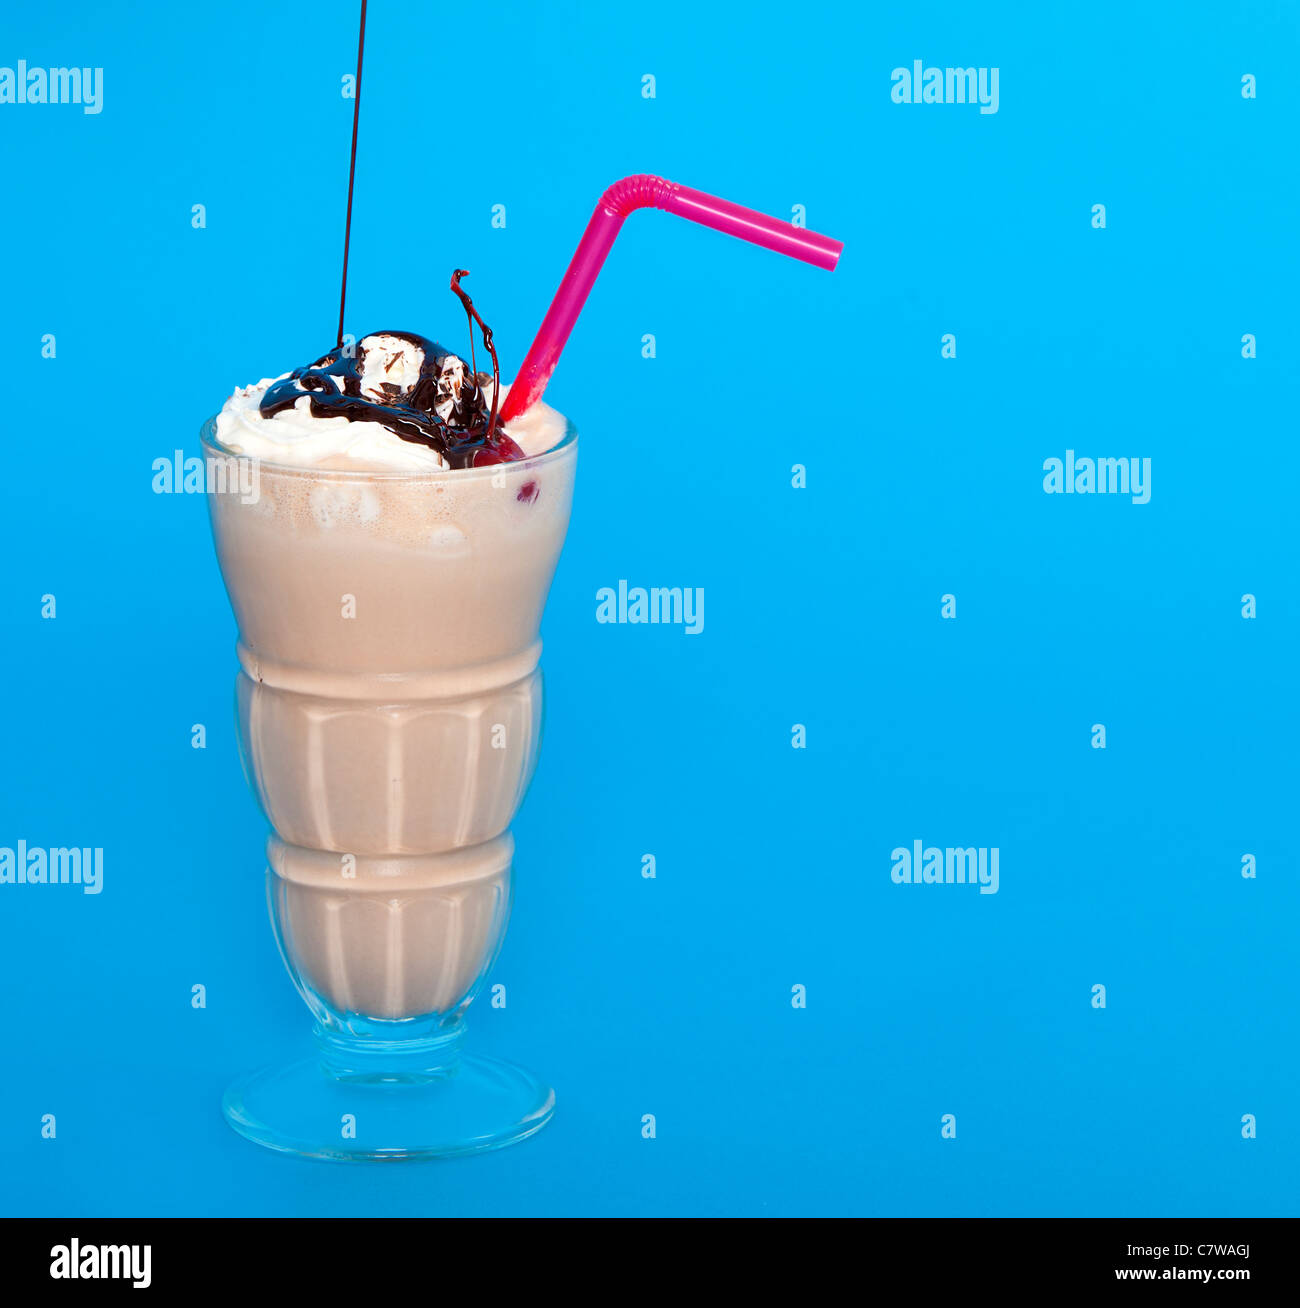 Chocolate shake with a drizzle of chocolate sauce on a blue background Stock Photo